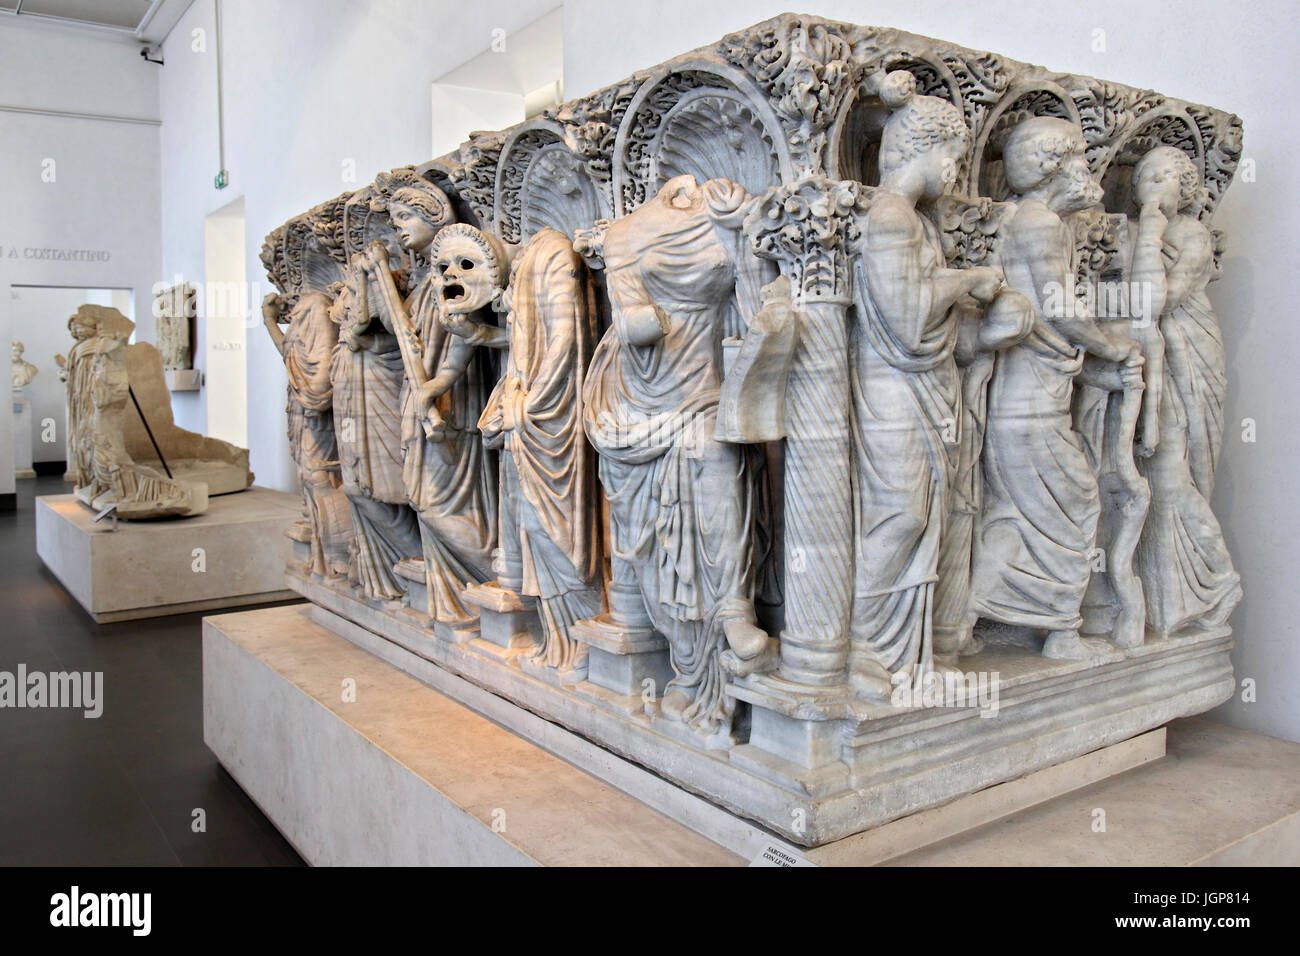 Sarcophagus with the Muses in Museo Nazionale Romano: Palazzo Massimo Alle Terme, Rome, Italy. Stock Photo